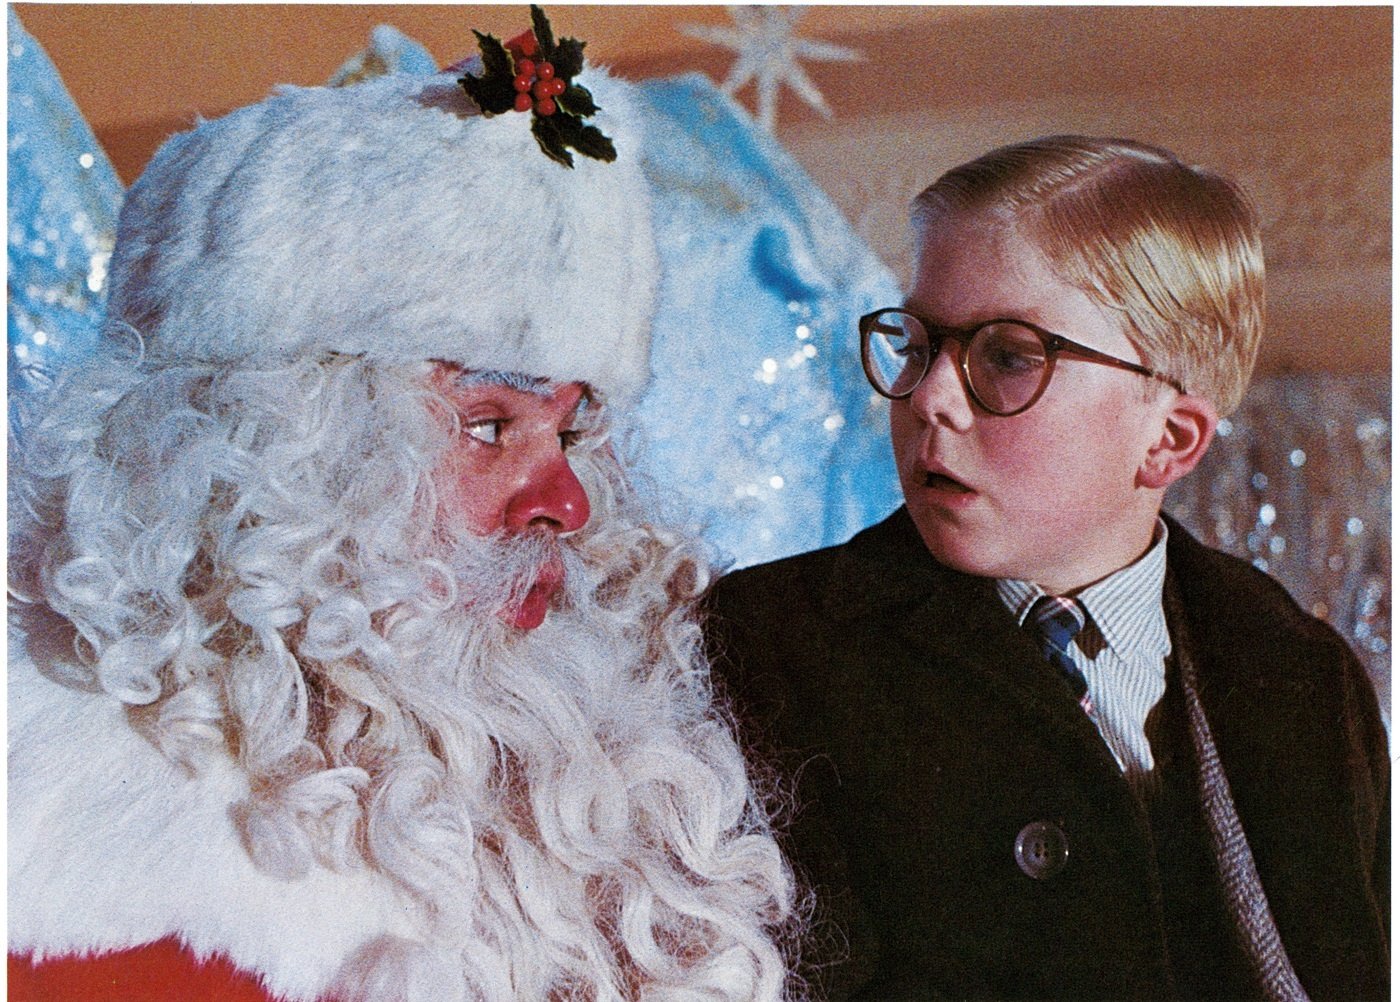 Peter Billingsley sits on Santa's lap in a scene from the film 'A Christmas Story',